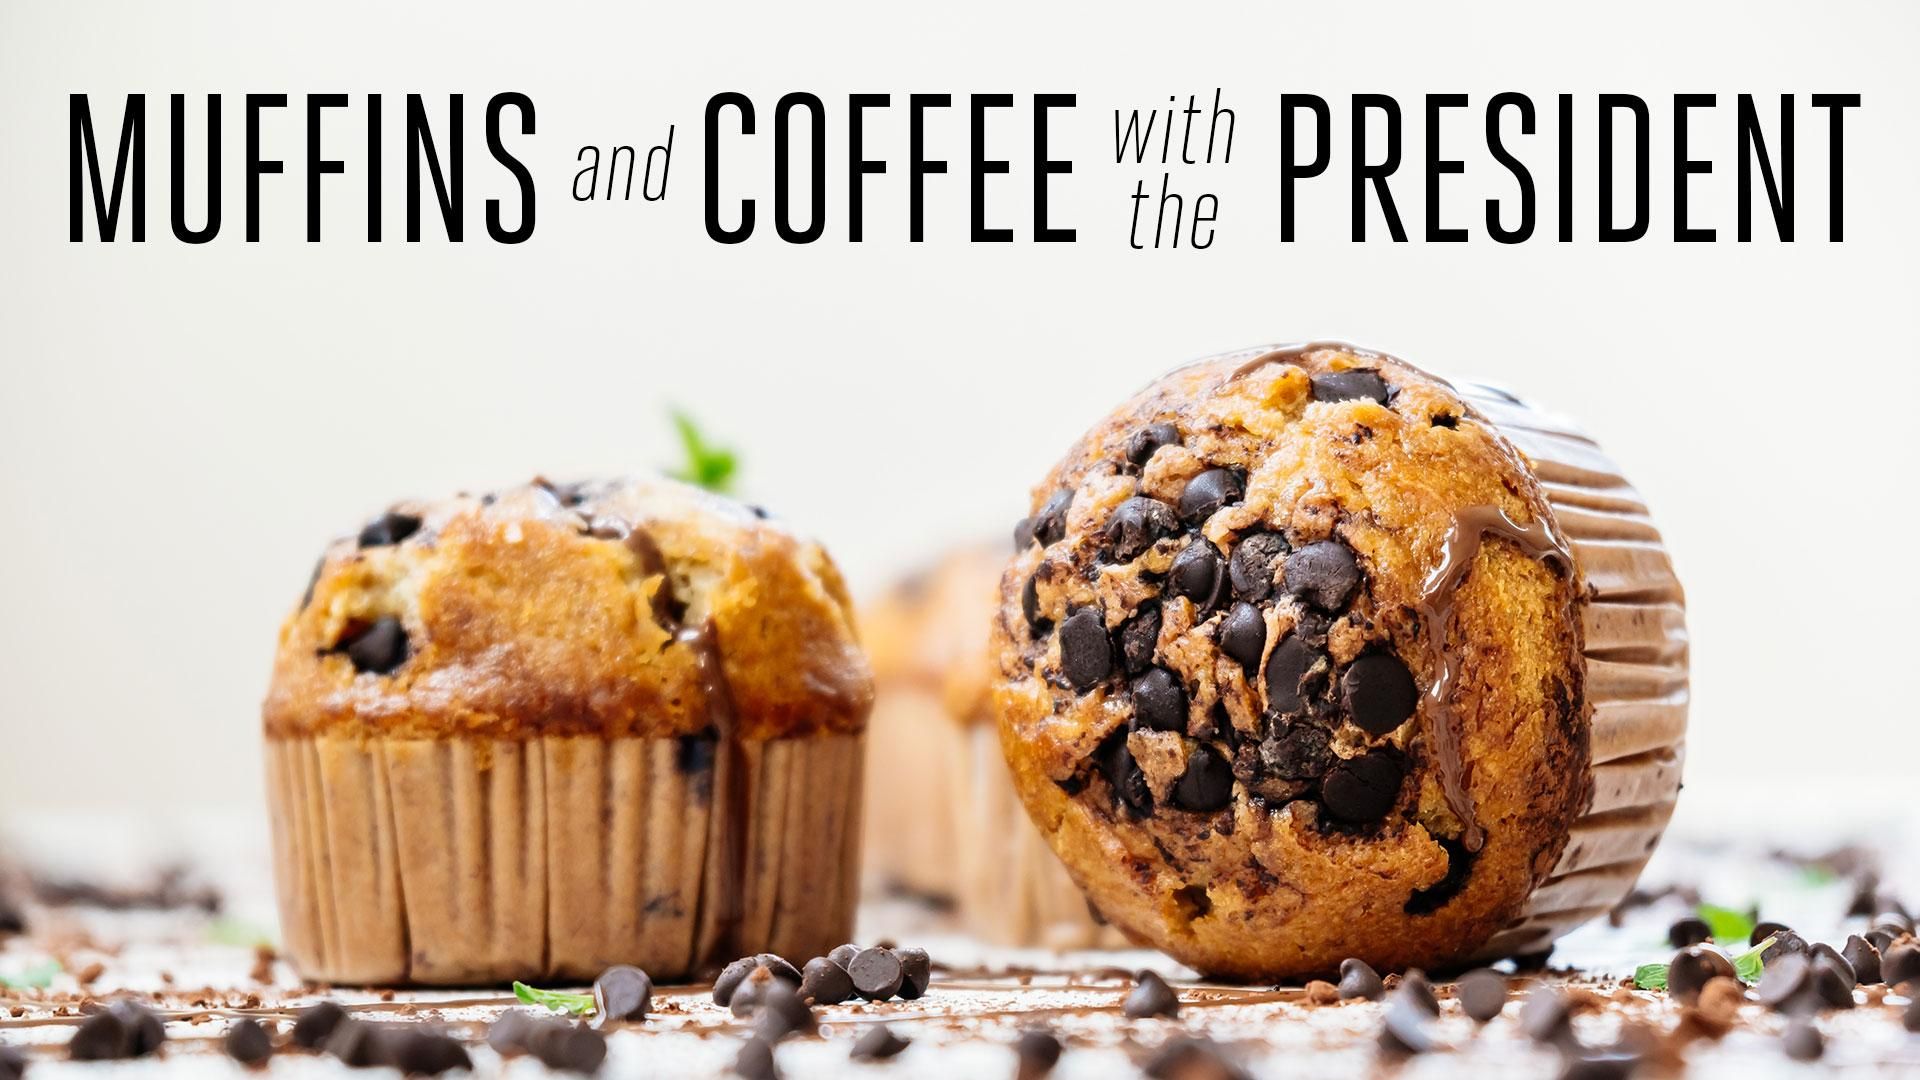 Muffins and Coffee with the President